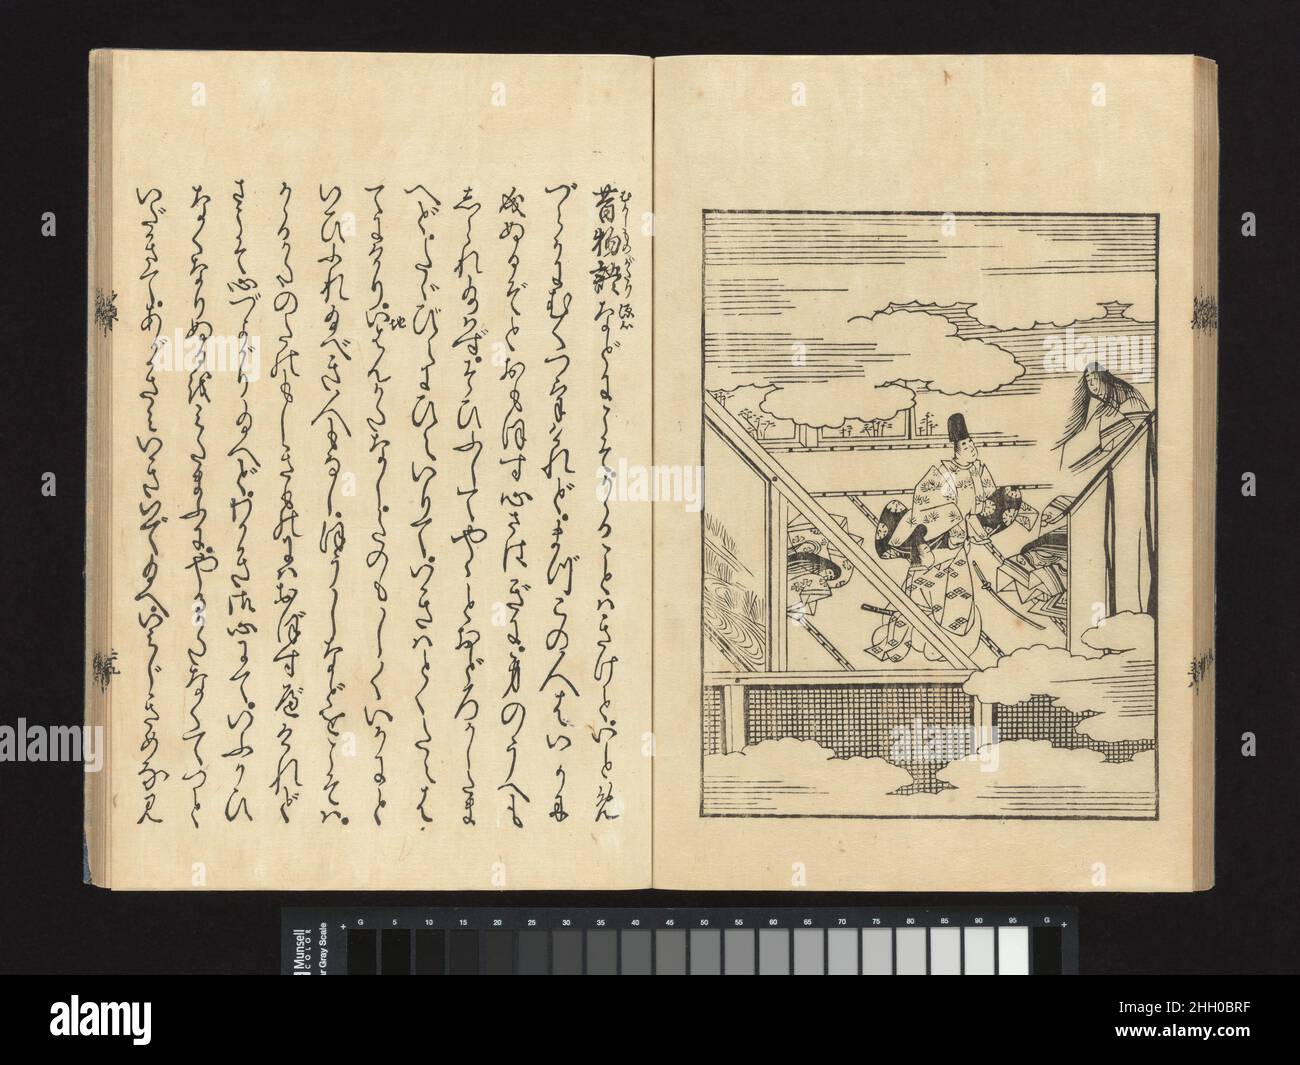 The Illustrated Tale of Genji ca. 1650 Yamamoto Shunsh? For centuries, The Tale of Genji circulated in manuscript copies limited to members of the social elite. The classic became more widely known starting only in the early Edo period (1615–1868), as texts of the entire tale, digests, and handbook-style synopses were printed, first in movable-type editions and then in more affordable woodblock-printed versions. One of the earliest mass-produced editions to include woodblock-printed illustrations was this multivolume version, first published in about 1650. The Kyoto- and sometimes Edo-based Ya Stock Photo